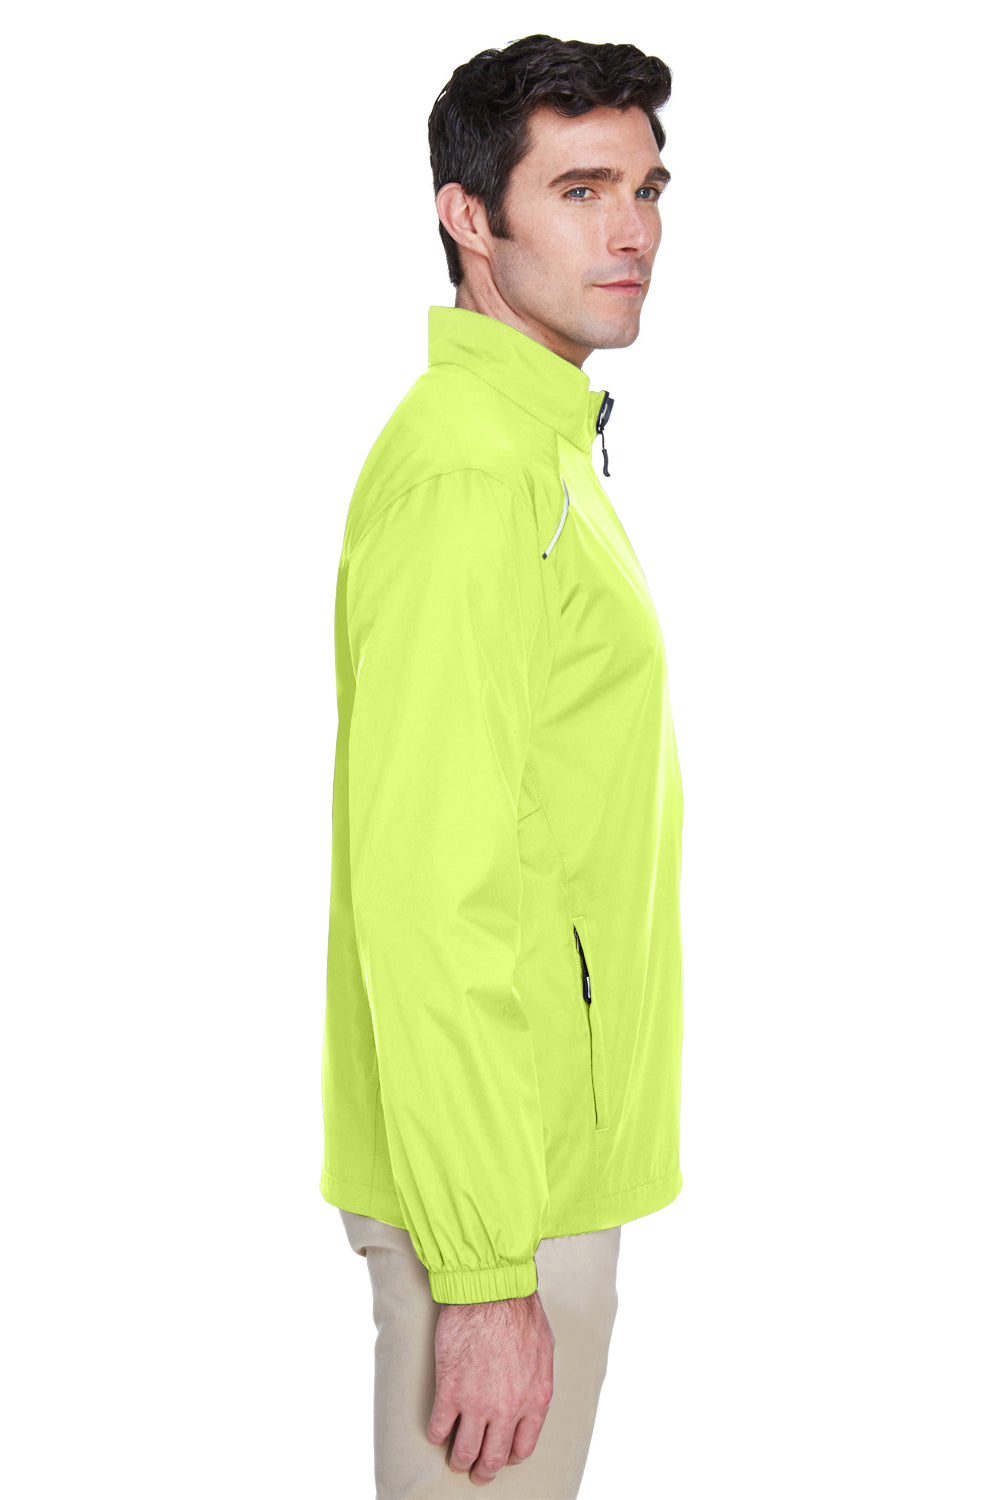 Core 365 88183 Mens Motivate Water Resistant Full Zip Jacket Safety Yellow Side